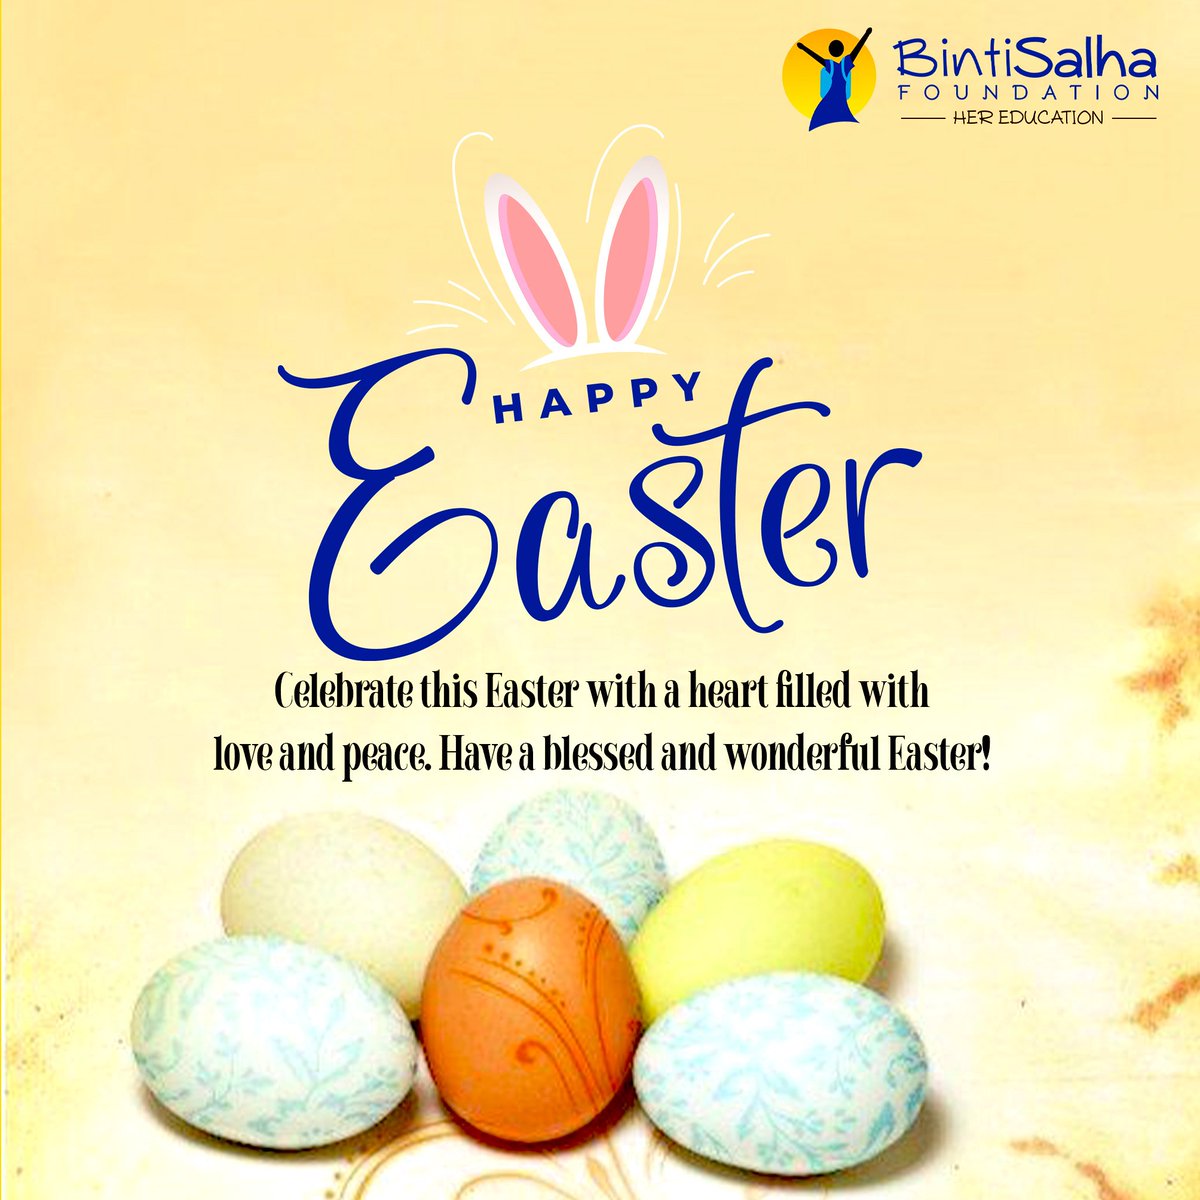 Happy Easter! May the risen Christ bring peace to your heart and joy to your soul. Wishing you a wonderful day filled with love and happiness🎉 #BSF2024 #Miaka5yaBSF #5yrsofBSF